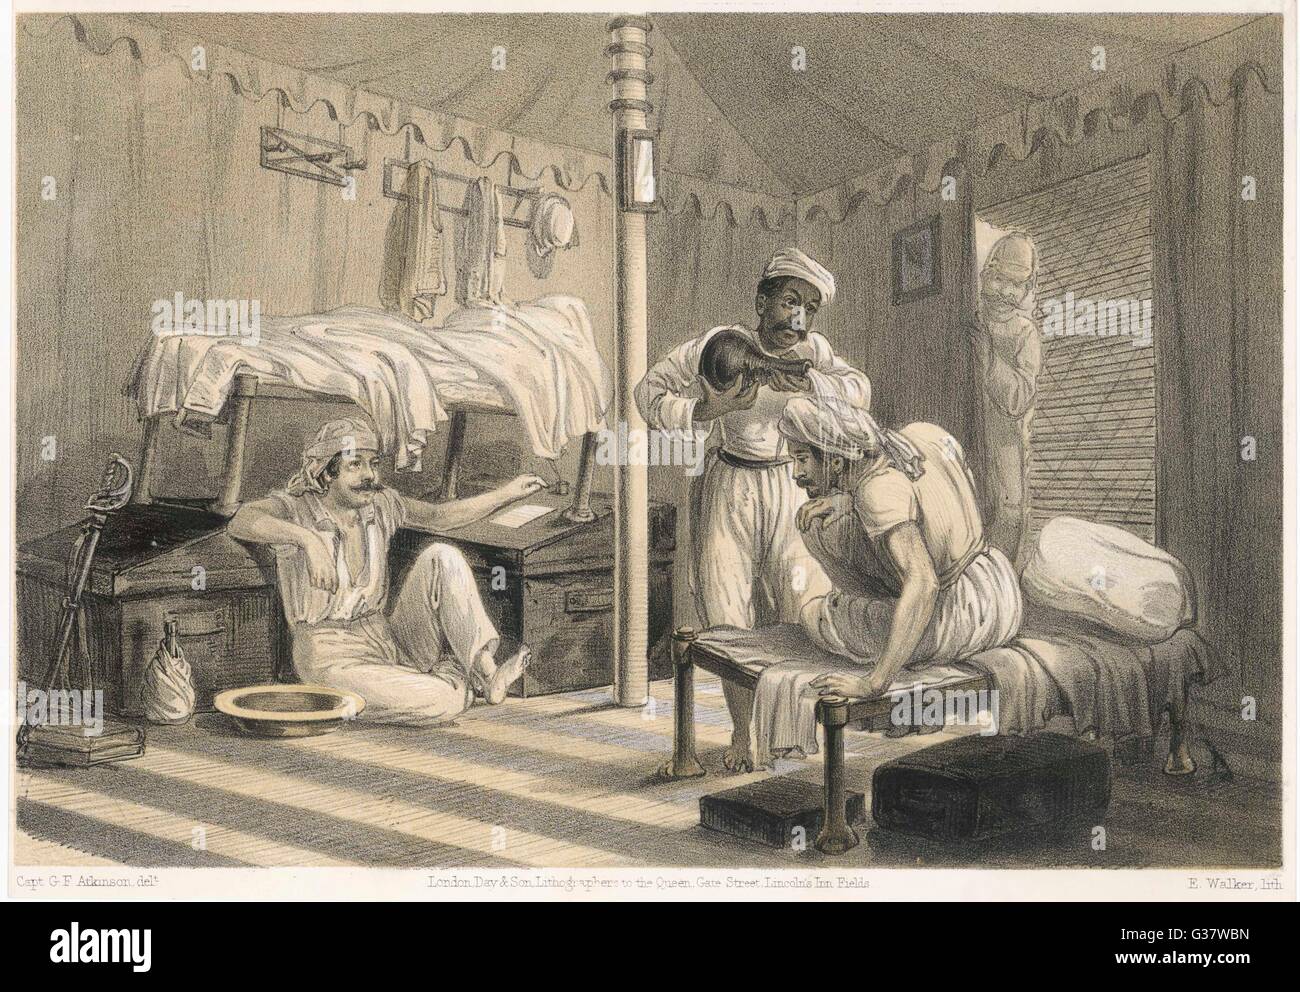 British officers relax in their tent in India, 1860 Stock Photo